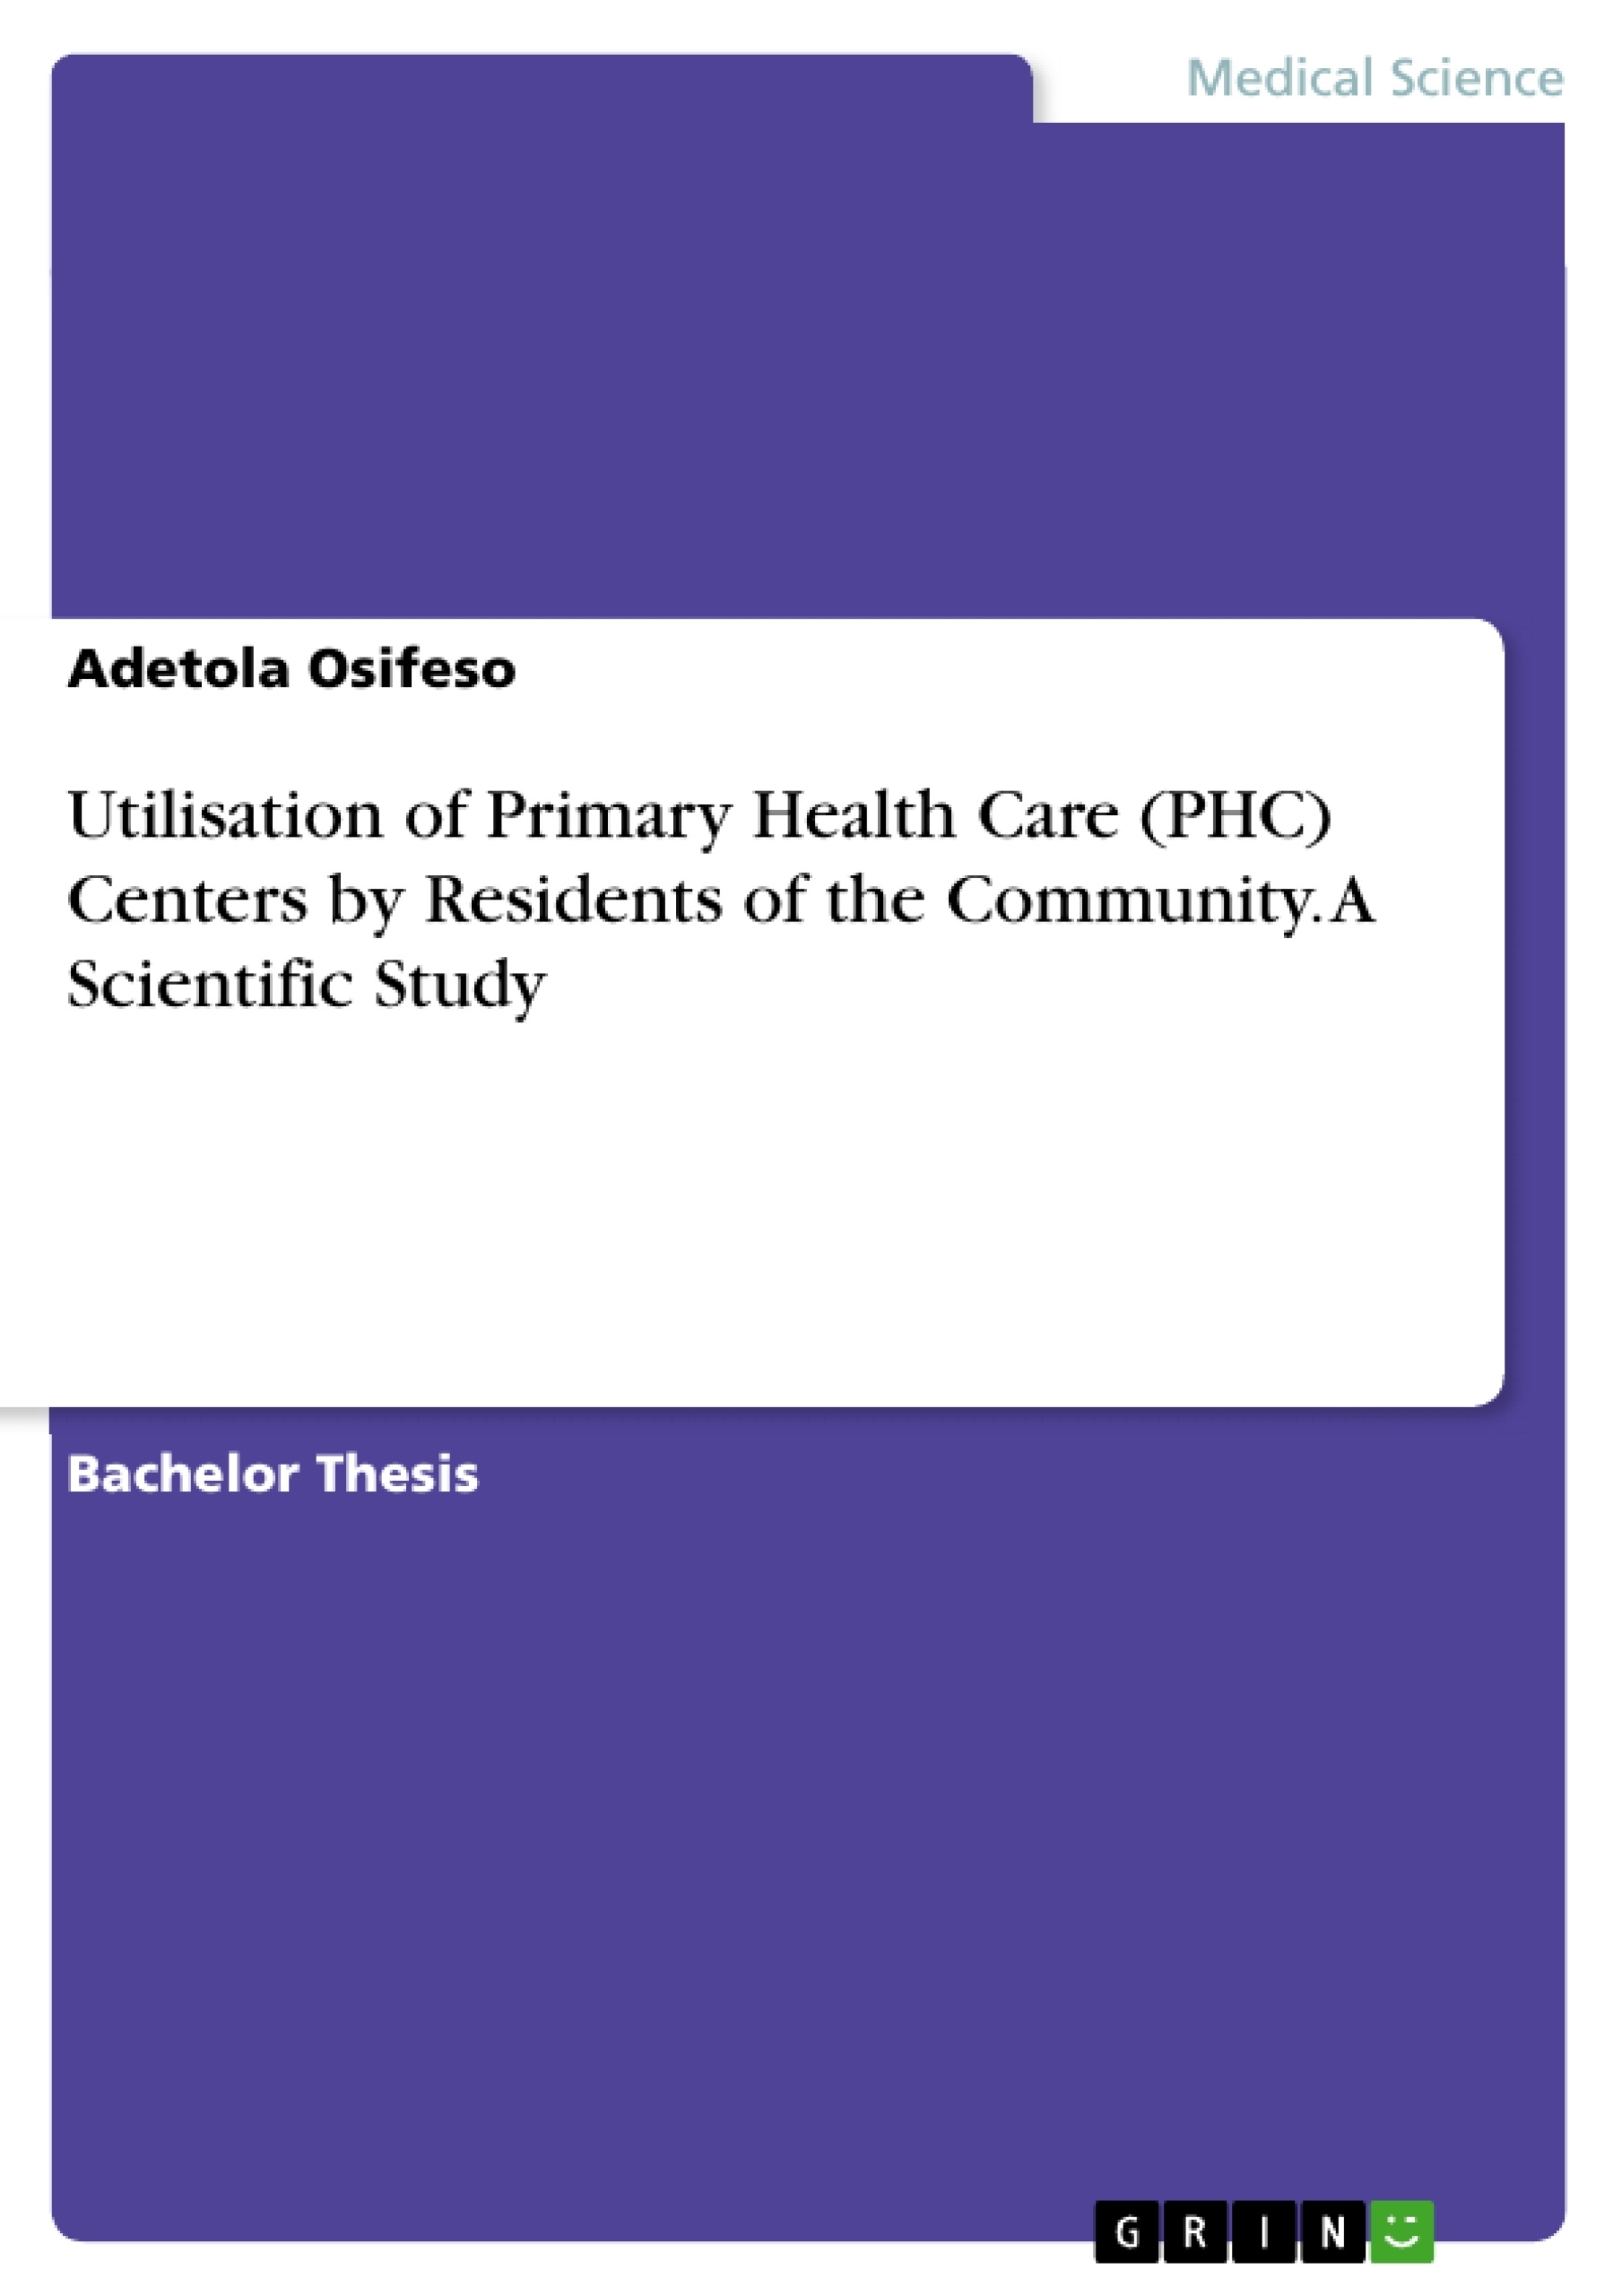 Title: Utilisation of Primary Health Care (PHC) Centers by Residents of the Community. A Scientific Study